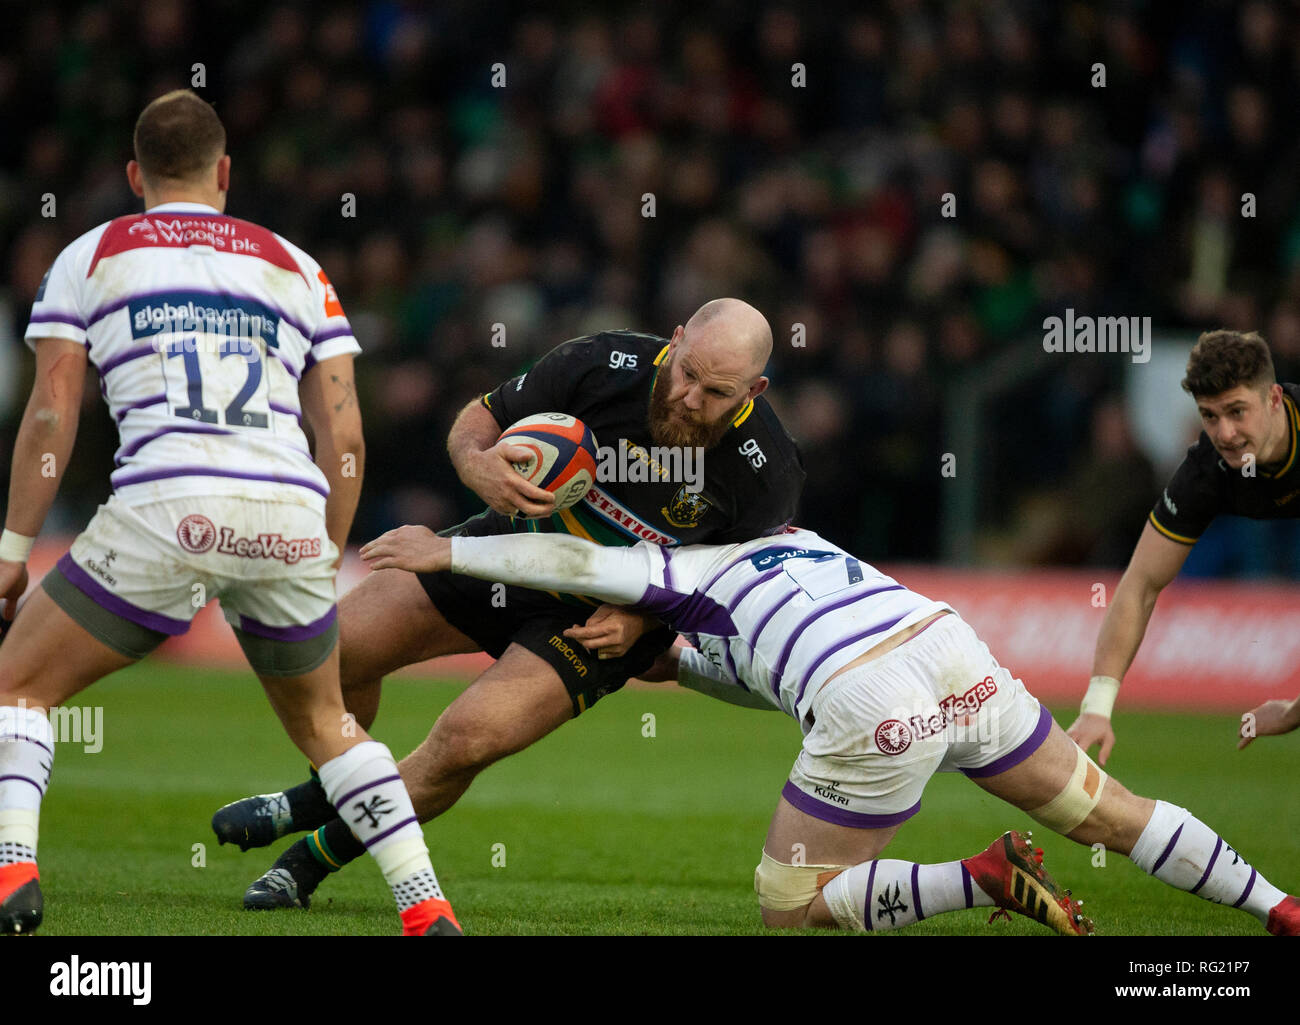 Northampton, UK. 26th January 2019. Ben Franks of Northampton Saints is tackled by Will Evans during the Premiership Rugby Cup match between Northampton Saints and Leicester Tigers. Andrew Taylor/Alamy Live News Stock Photo